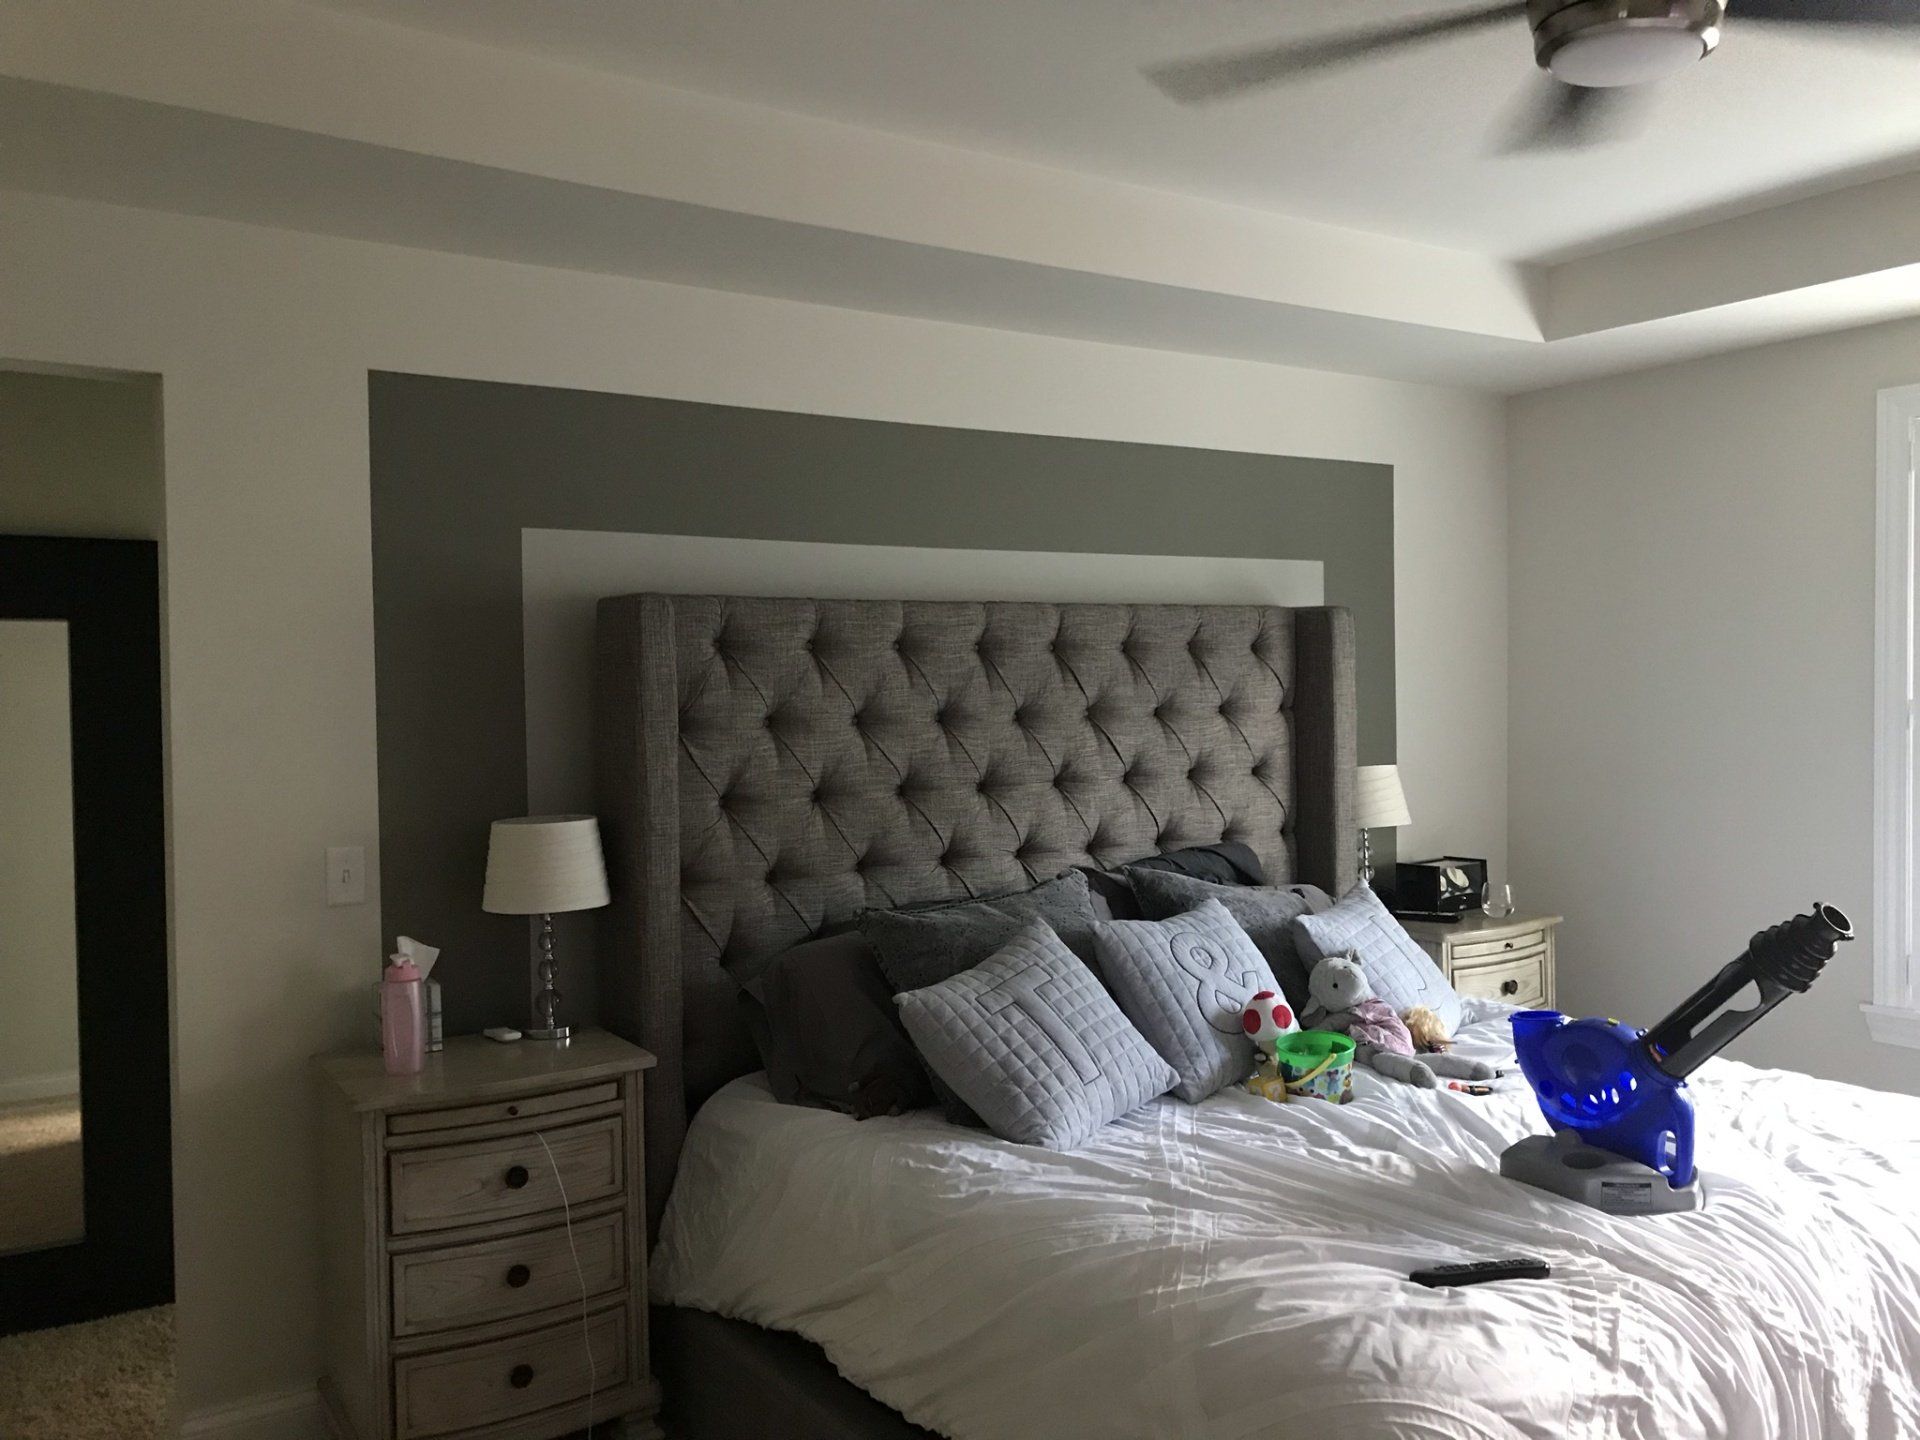 a bedroom with a bed , nightstand , mirror and ceiling fan .